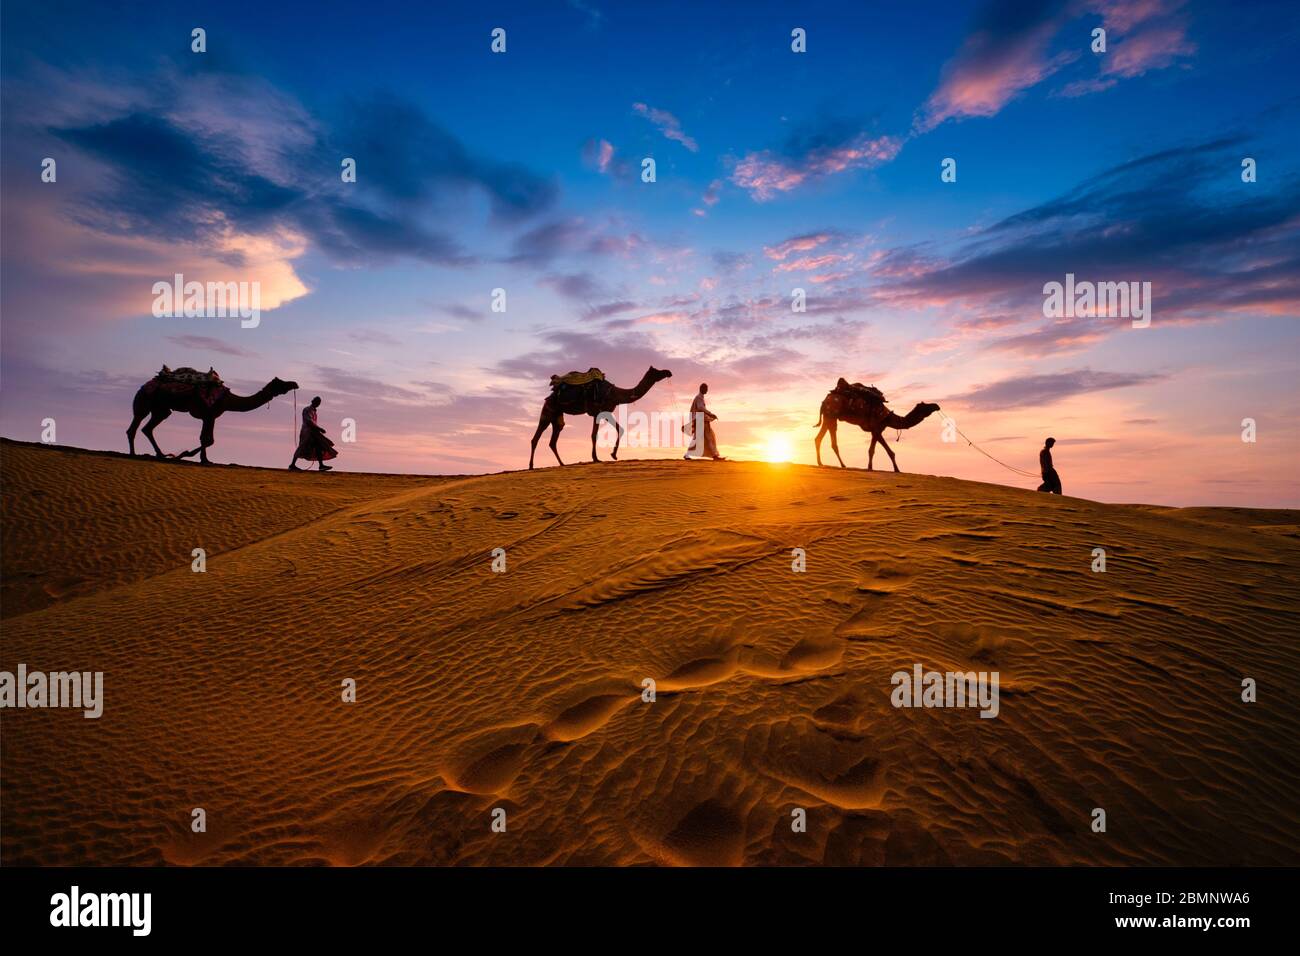 Indian cameleers camel driver with camel silhouettes in dunes on sunset. Jaisalmer, Rajasthan, India Stock Photo